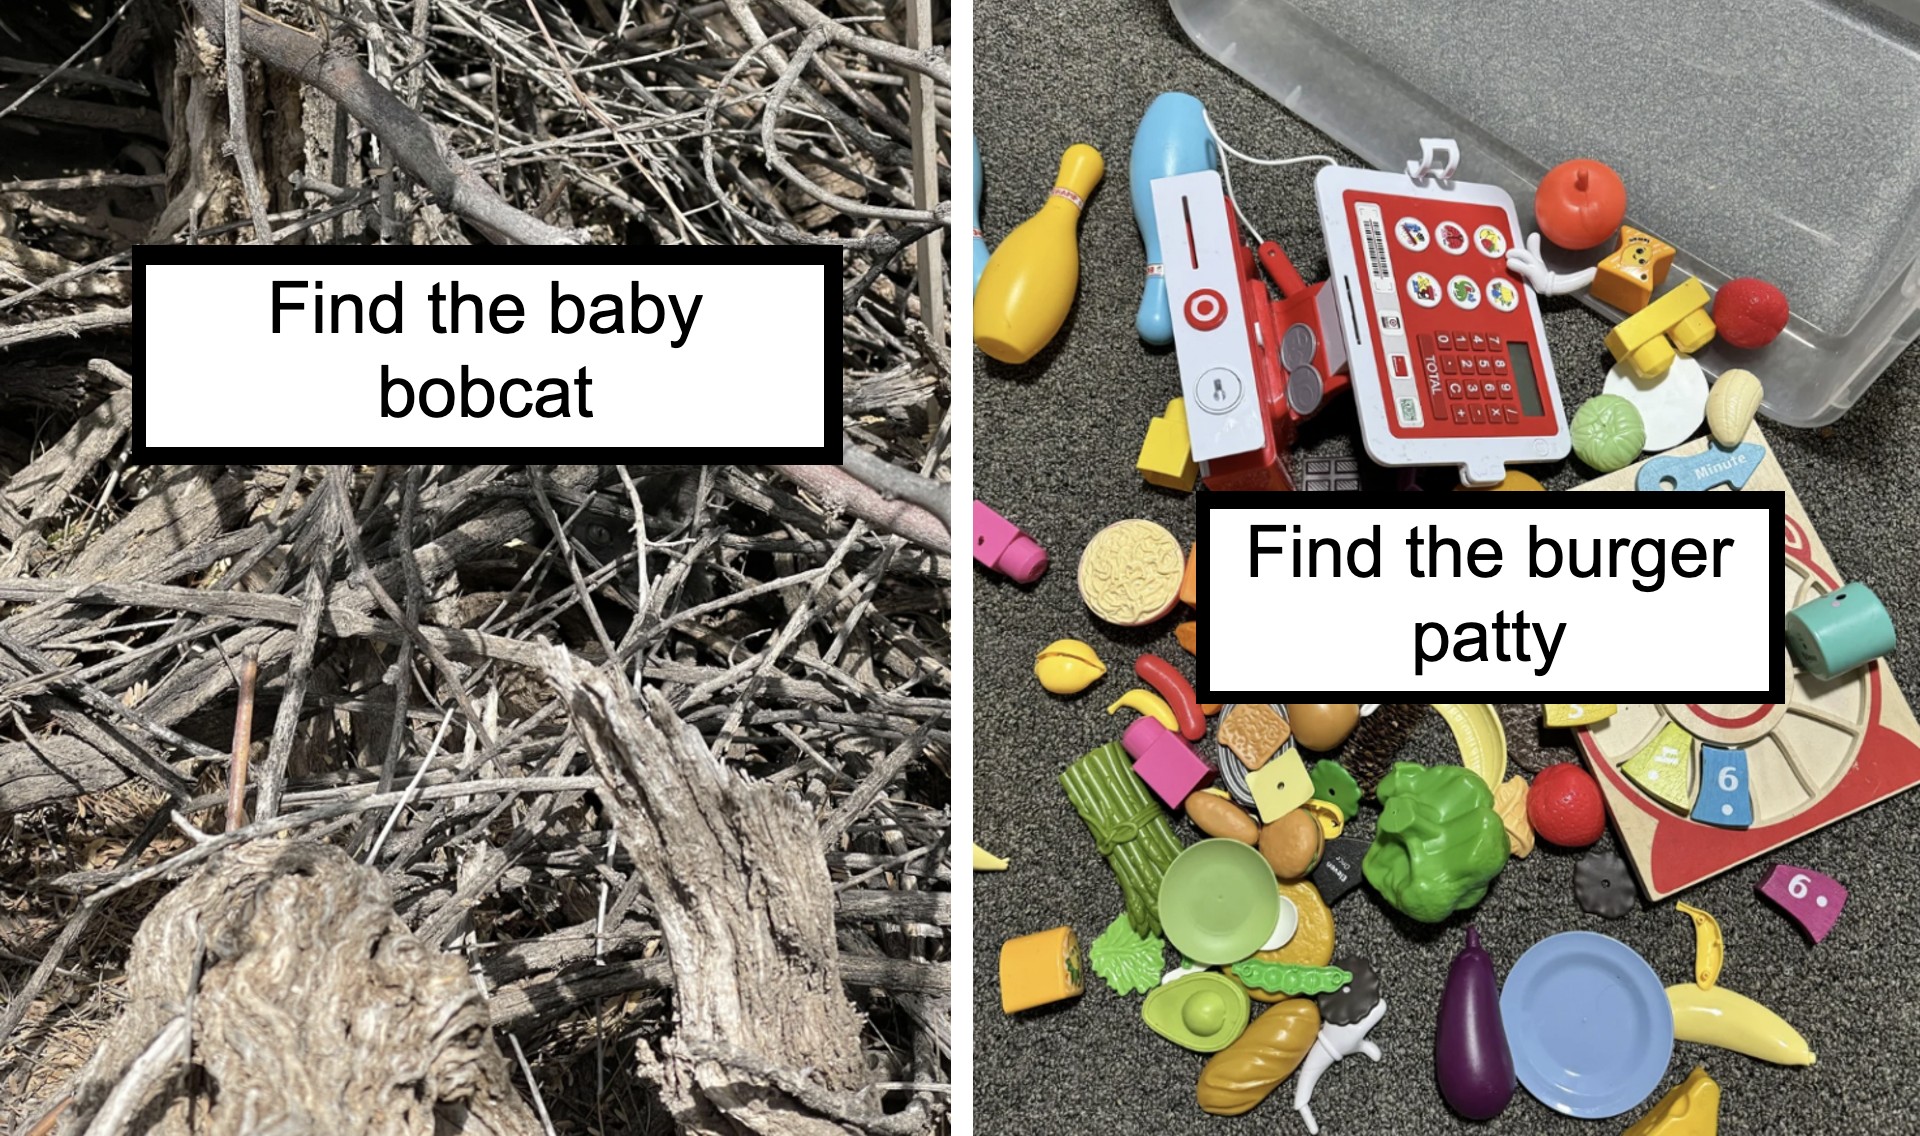 The image is split into two sections. The left side shows a pile of sticks and twigs with a hidden baby bobcat. A caption reads, "Find the baby bobcat." The right side shows various children's play food items scattered on a floor. A caption reads, "Find the burger patty.